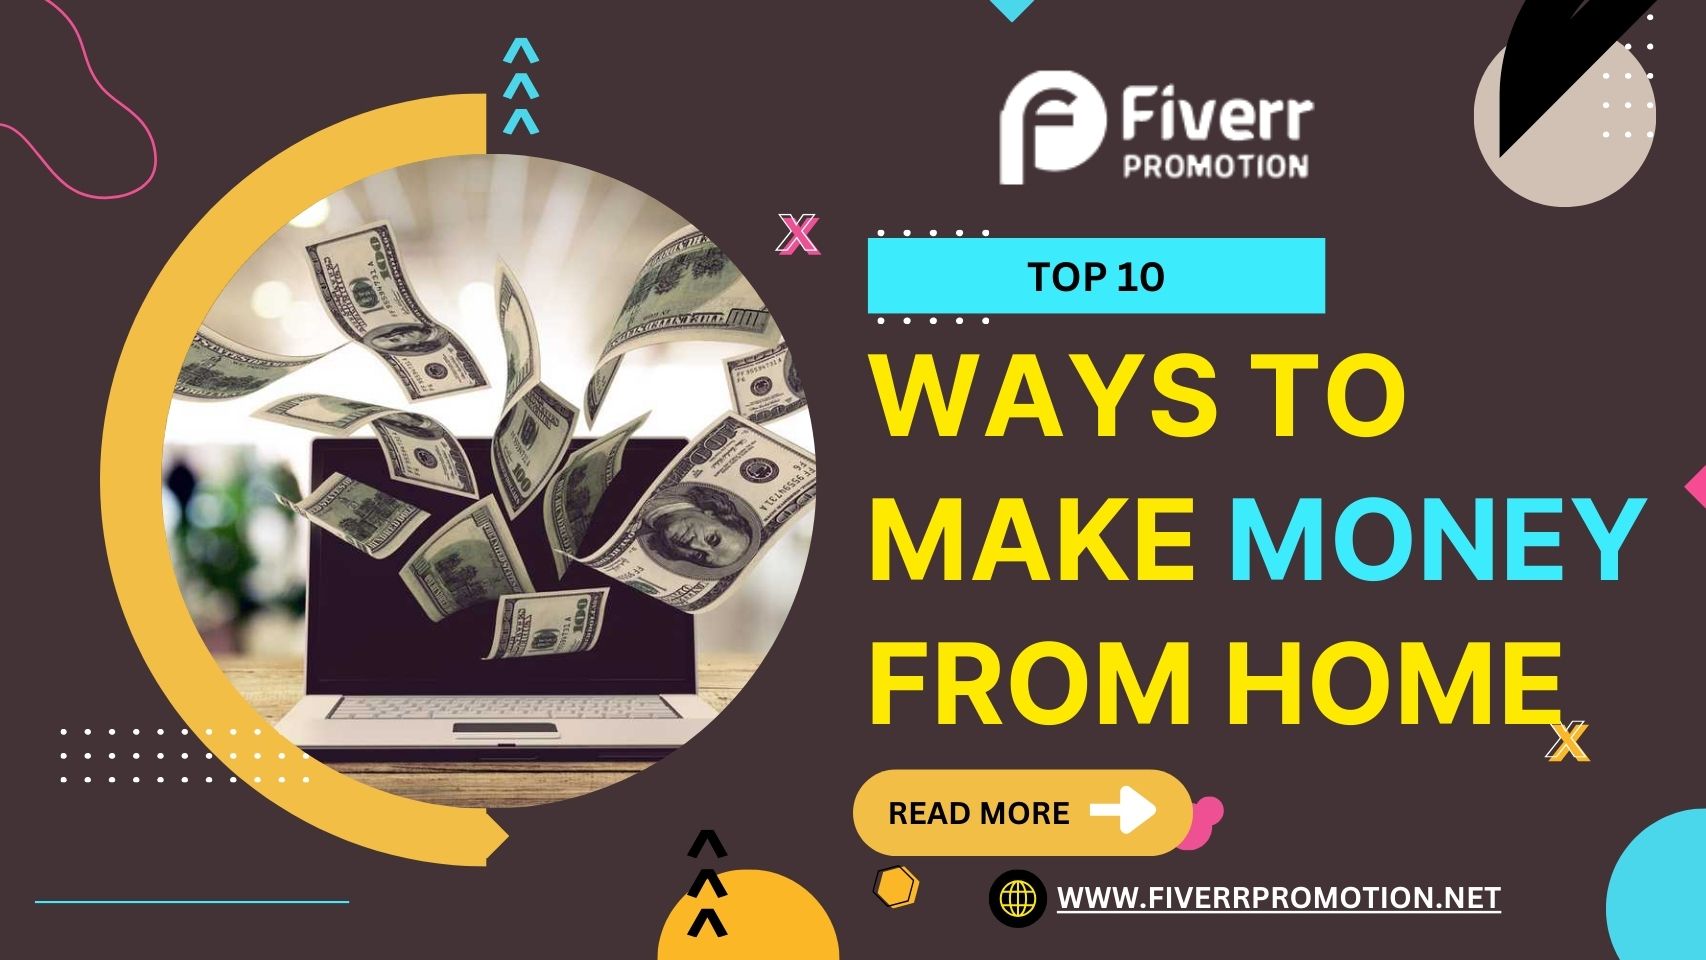 Top 10 ways to make money from home